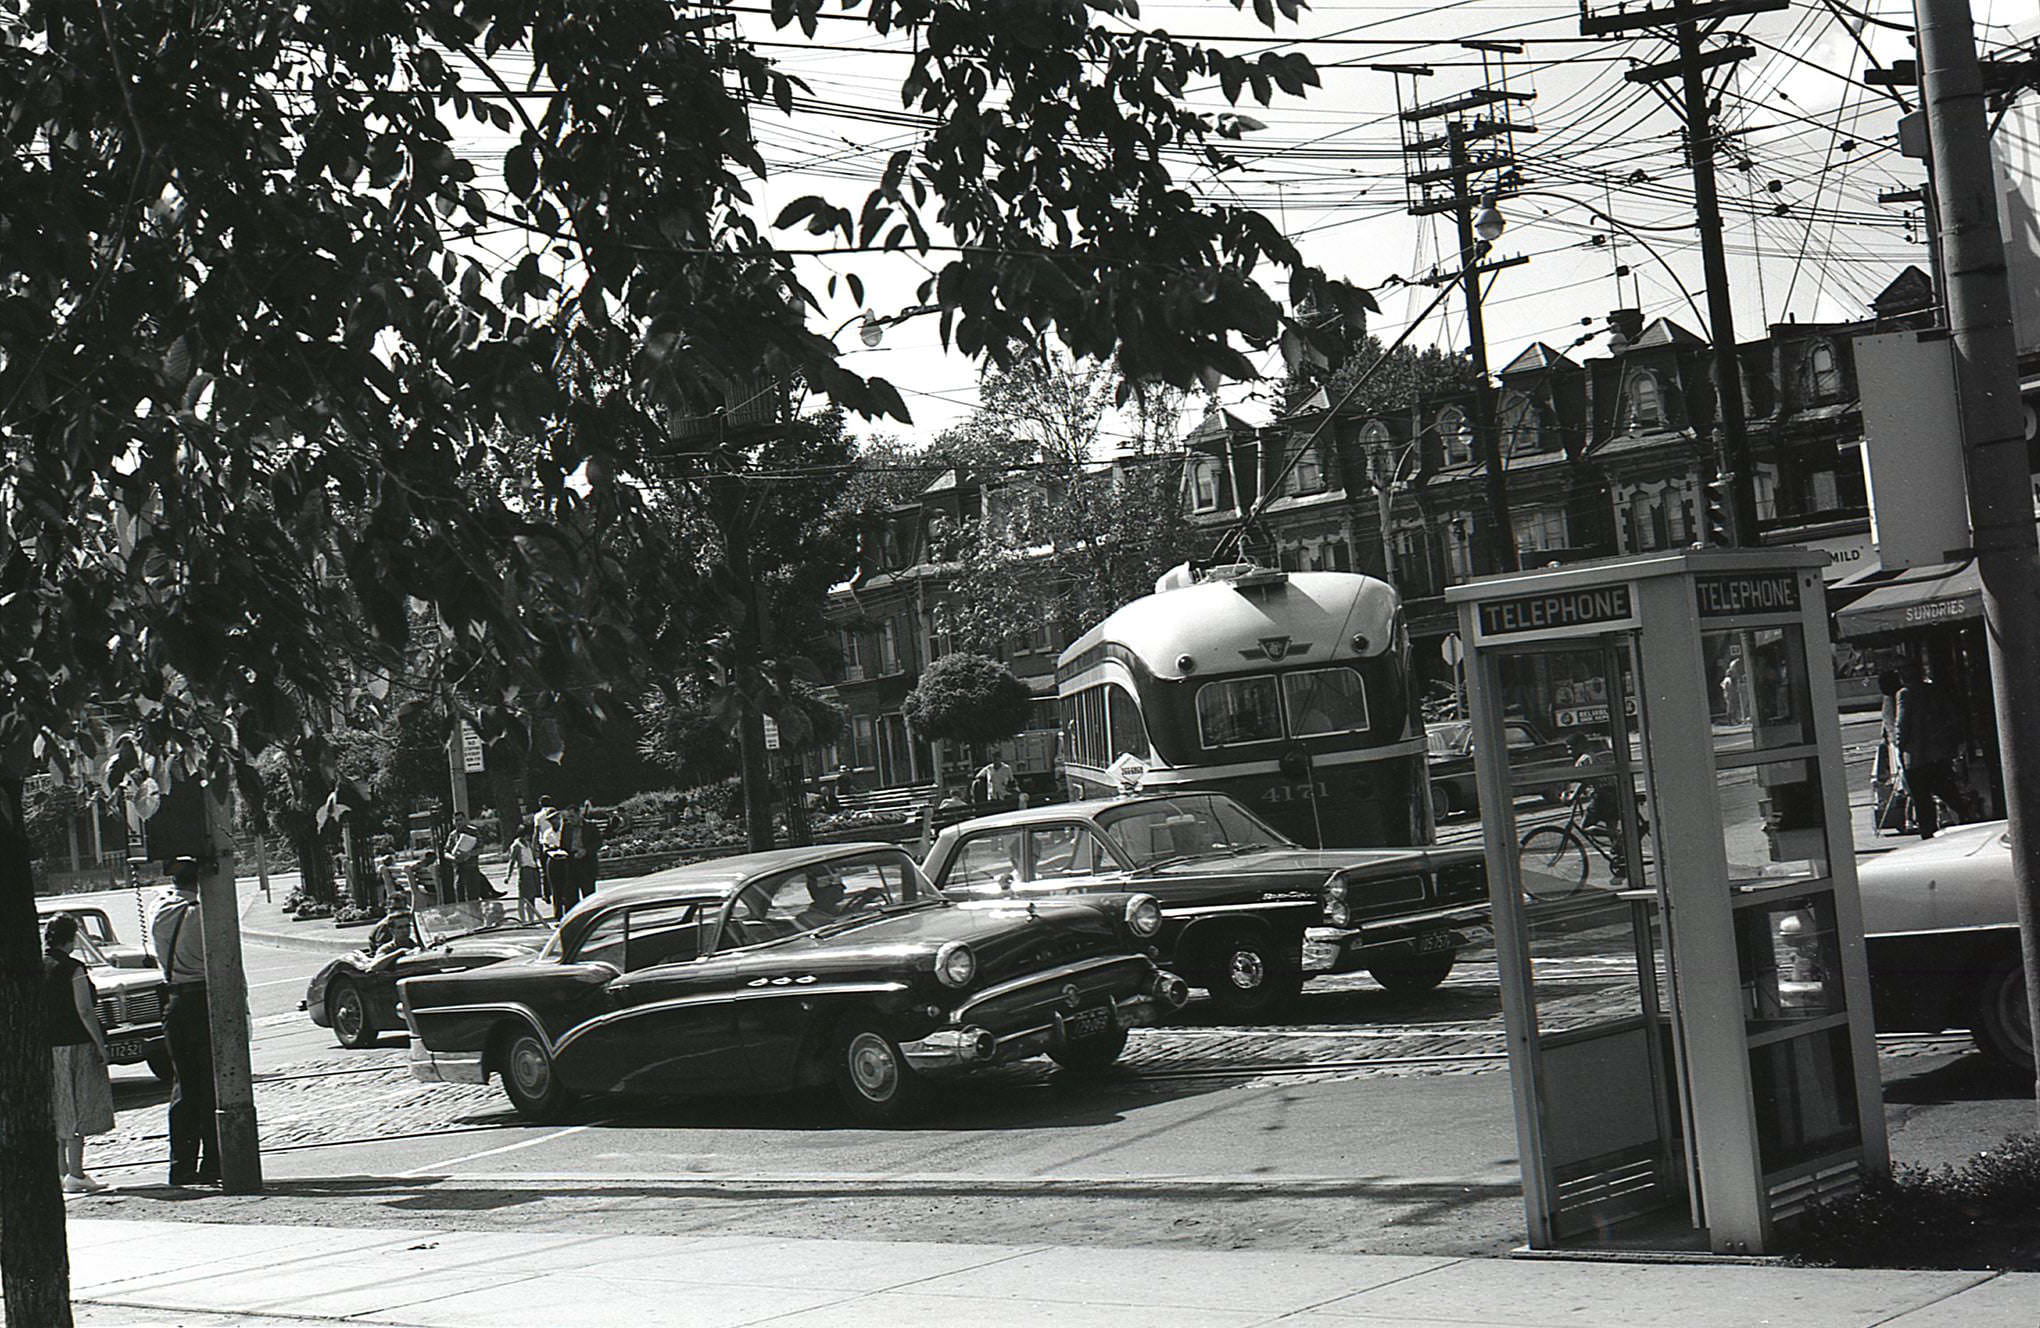 Phone booths, streetcars, and vintage vehicles at Gerrard and Parliament. Taken from the southeast corner, looking northwest across the island parkette in 1963